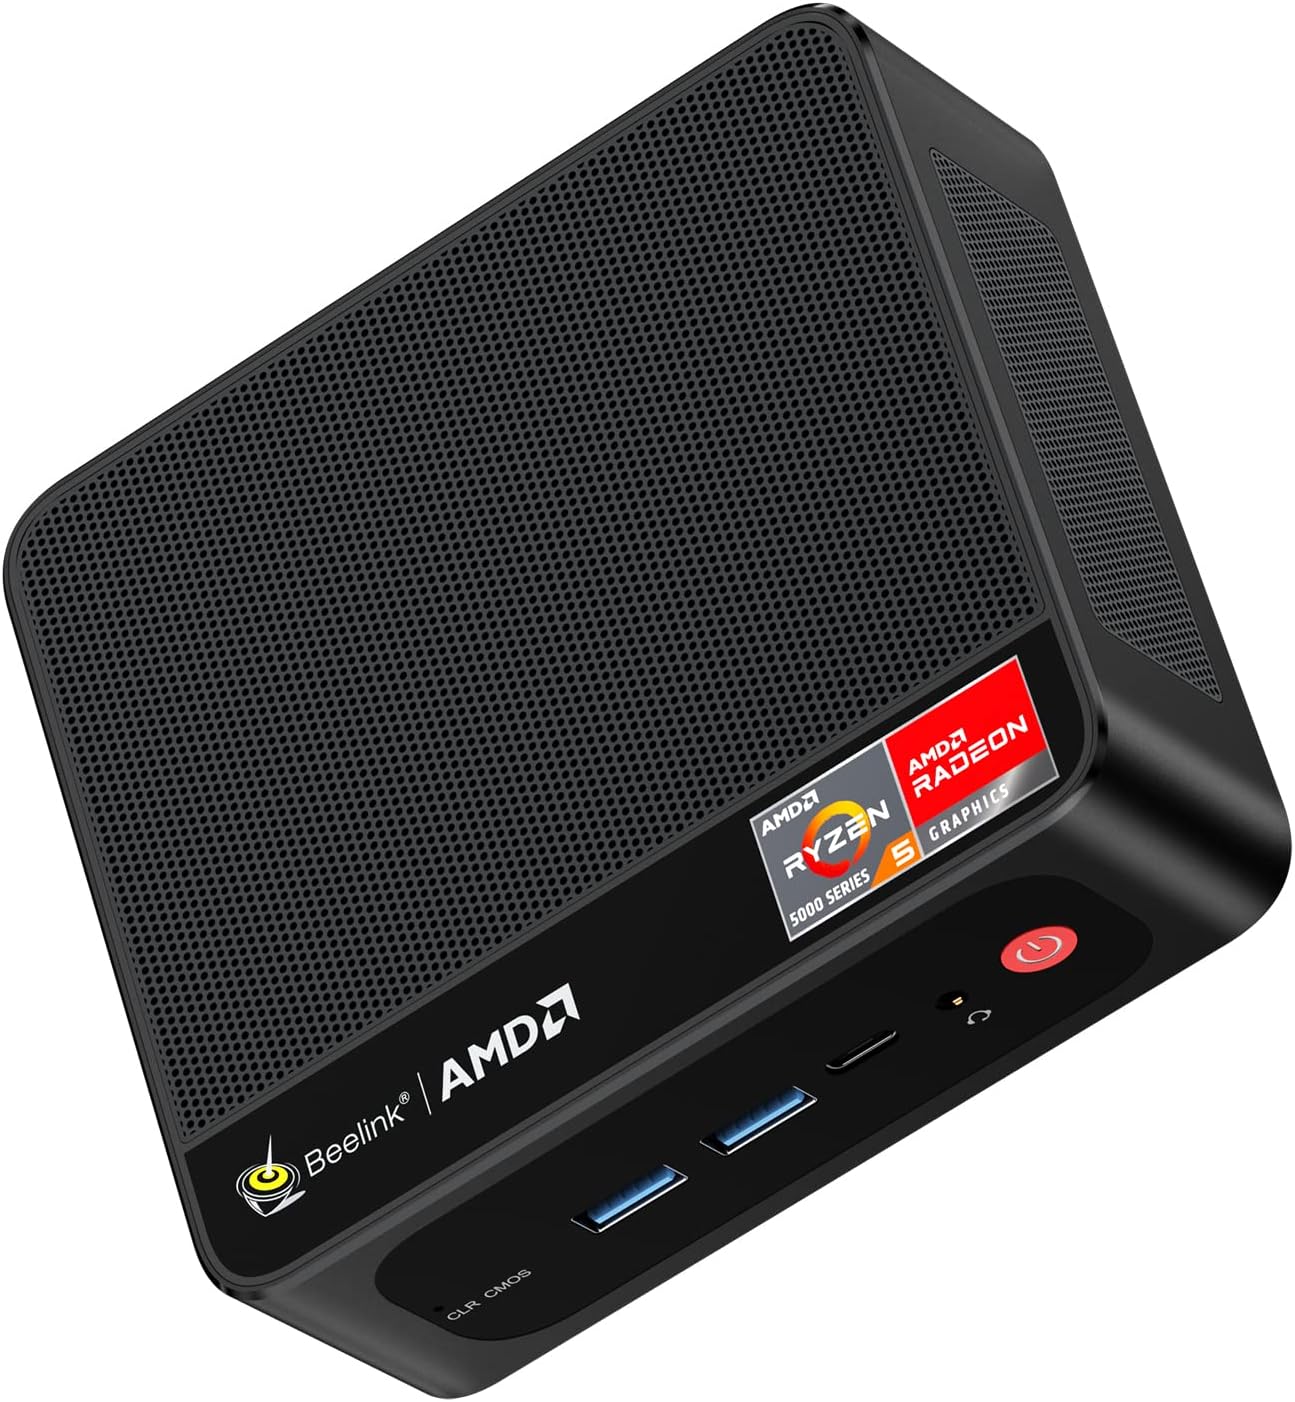 Beelink SER5 Mini PC, AMD Ryzen 5 5560U(Up to 4.0GHz) 6C/12T, Mini Desktop Computer 16GB DDR4 RAM 500GB NVMe SSD, Small Gaming PC Support DP HDMI 4K@60Hz Output/BT5.2/WiFi 6 for Gaming/Office/Home